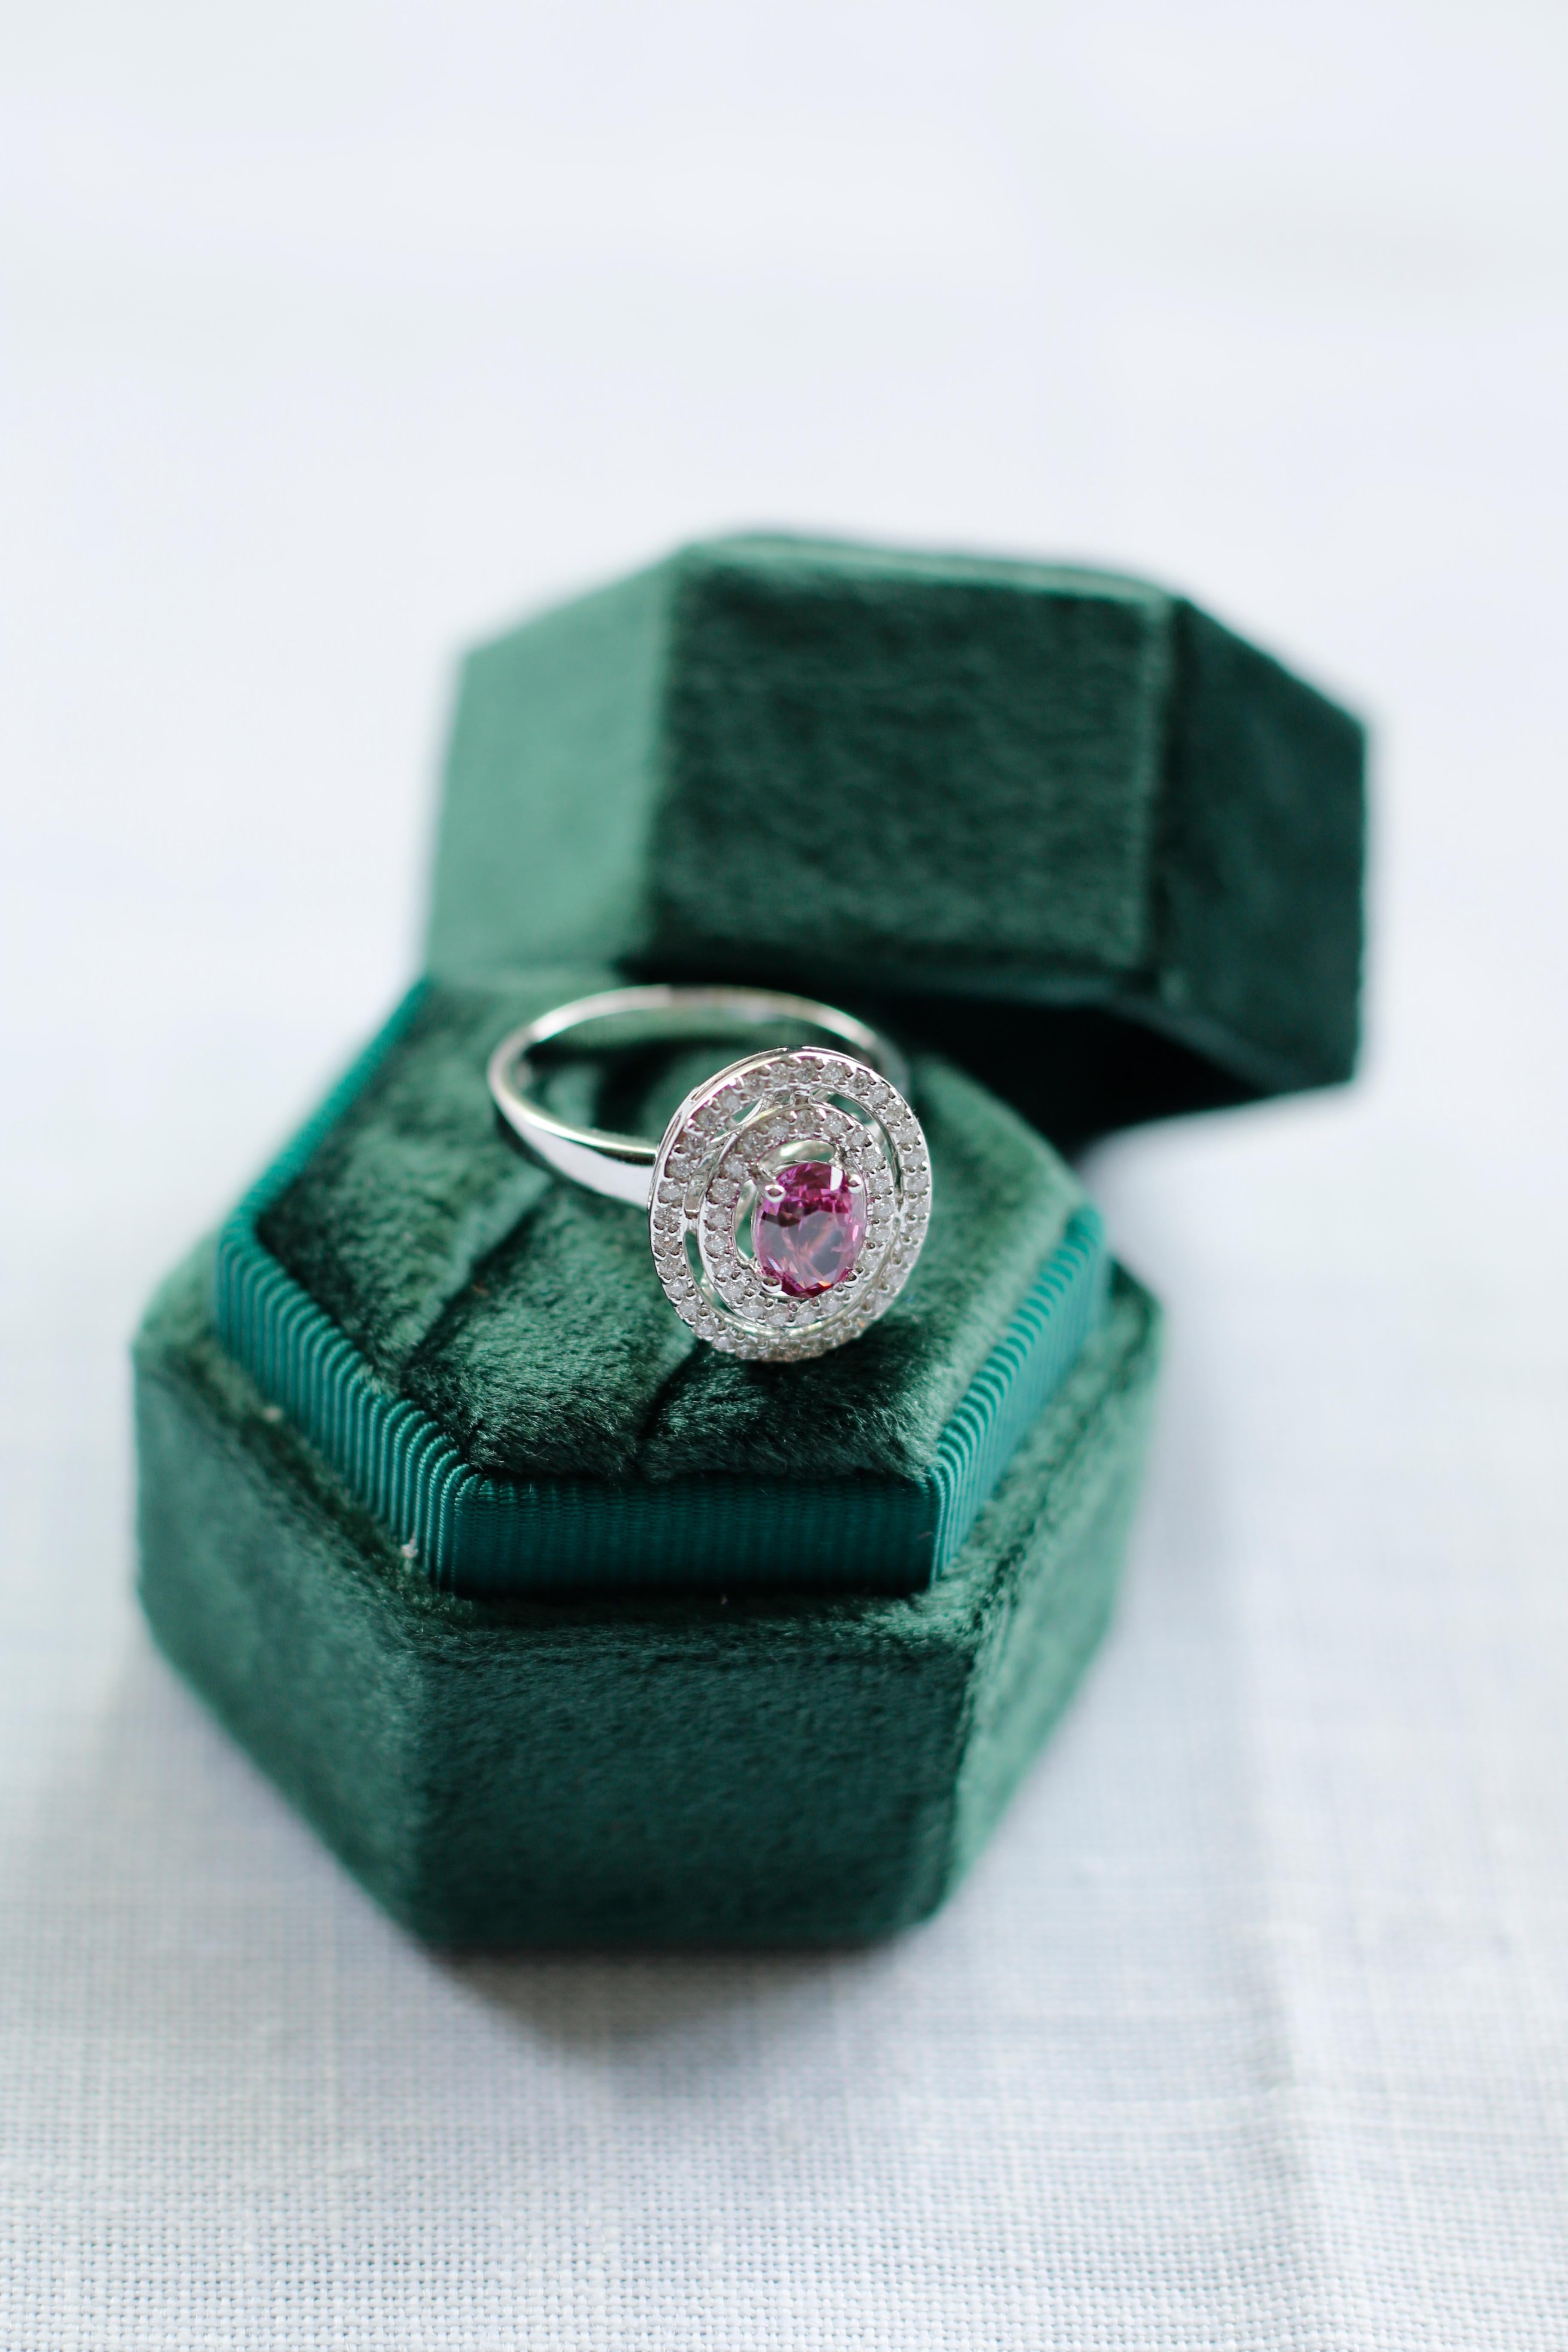 Contemporary Ceylon Pink Sapphire 1.12 Carat Cocktail Ring For Sale